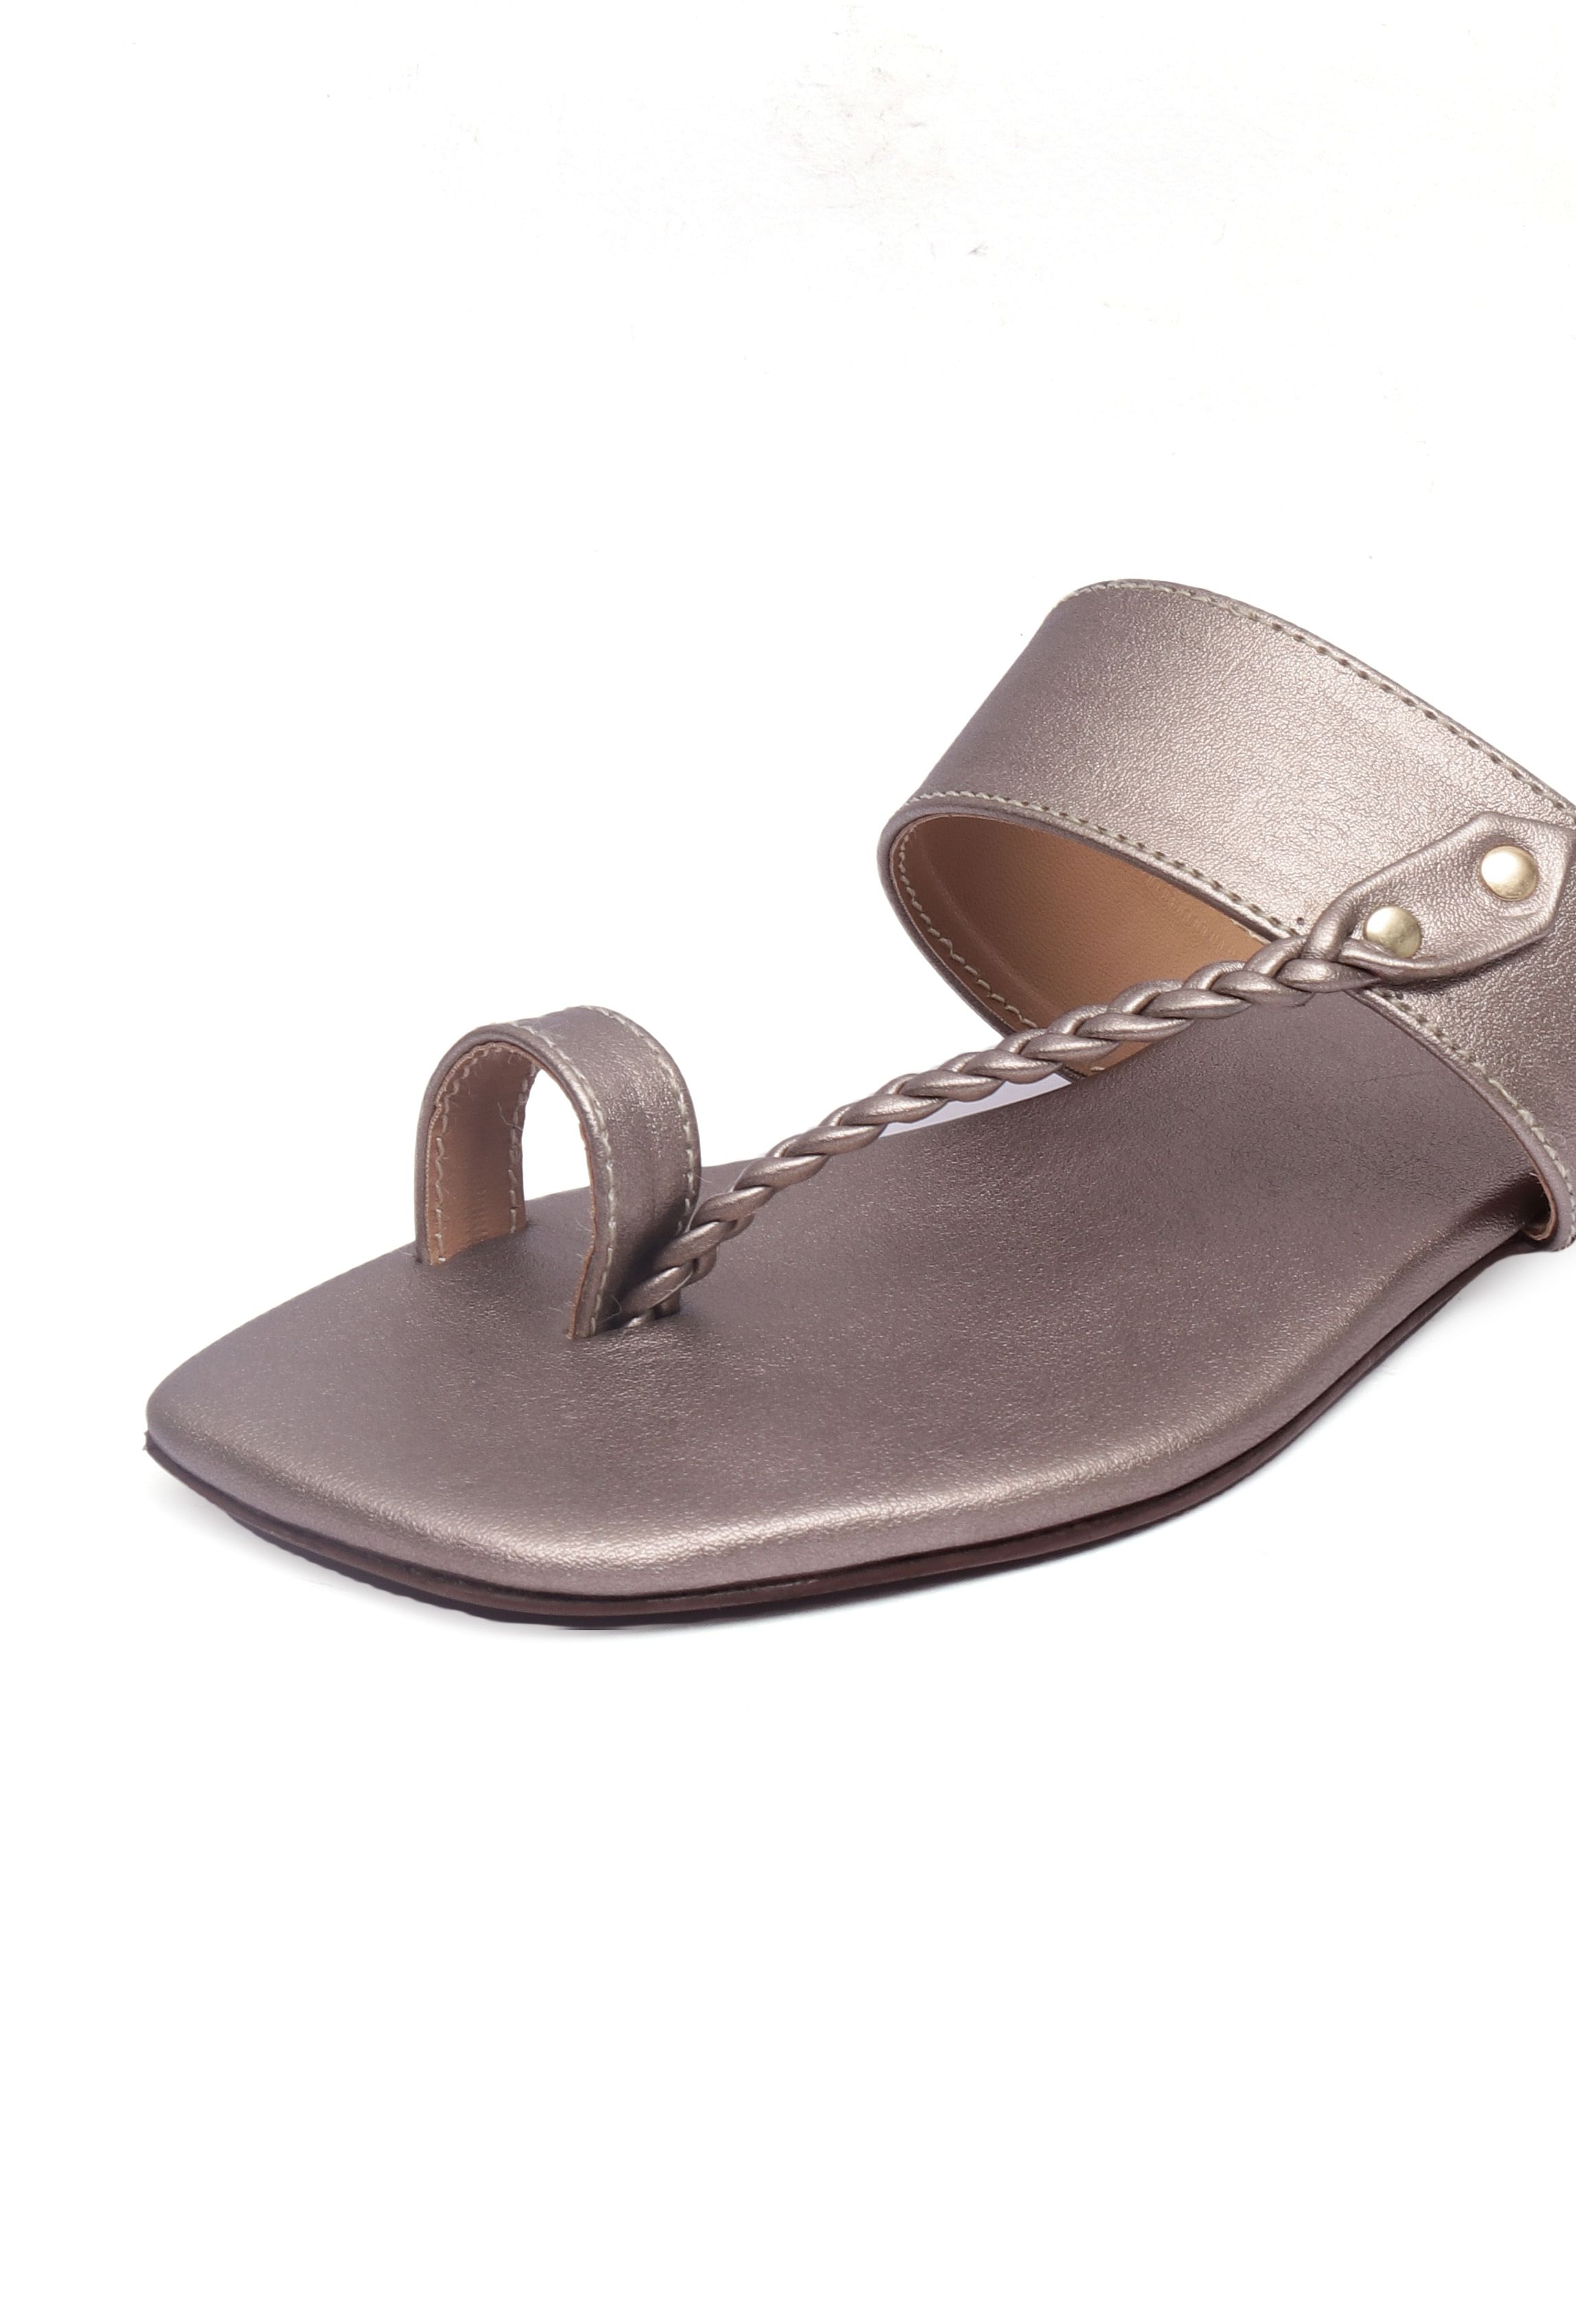 Lilac Slip-On Flats With Braided Straps & Insole Cushion Padding